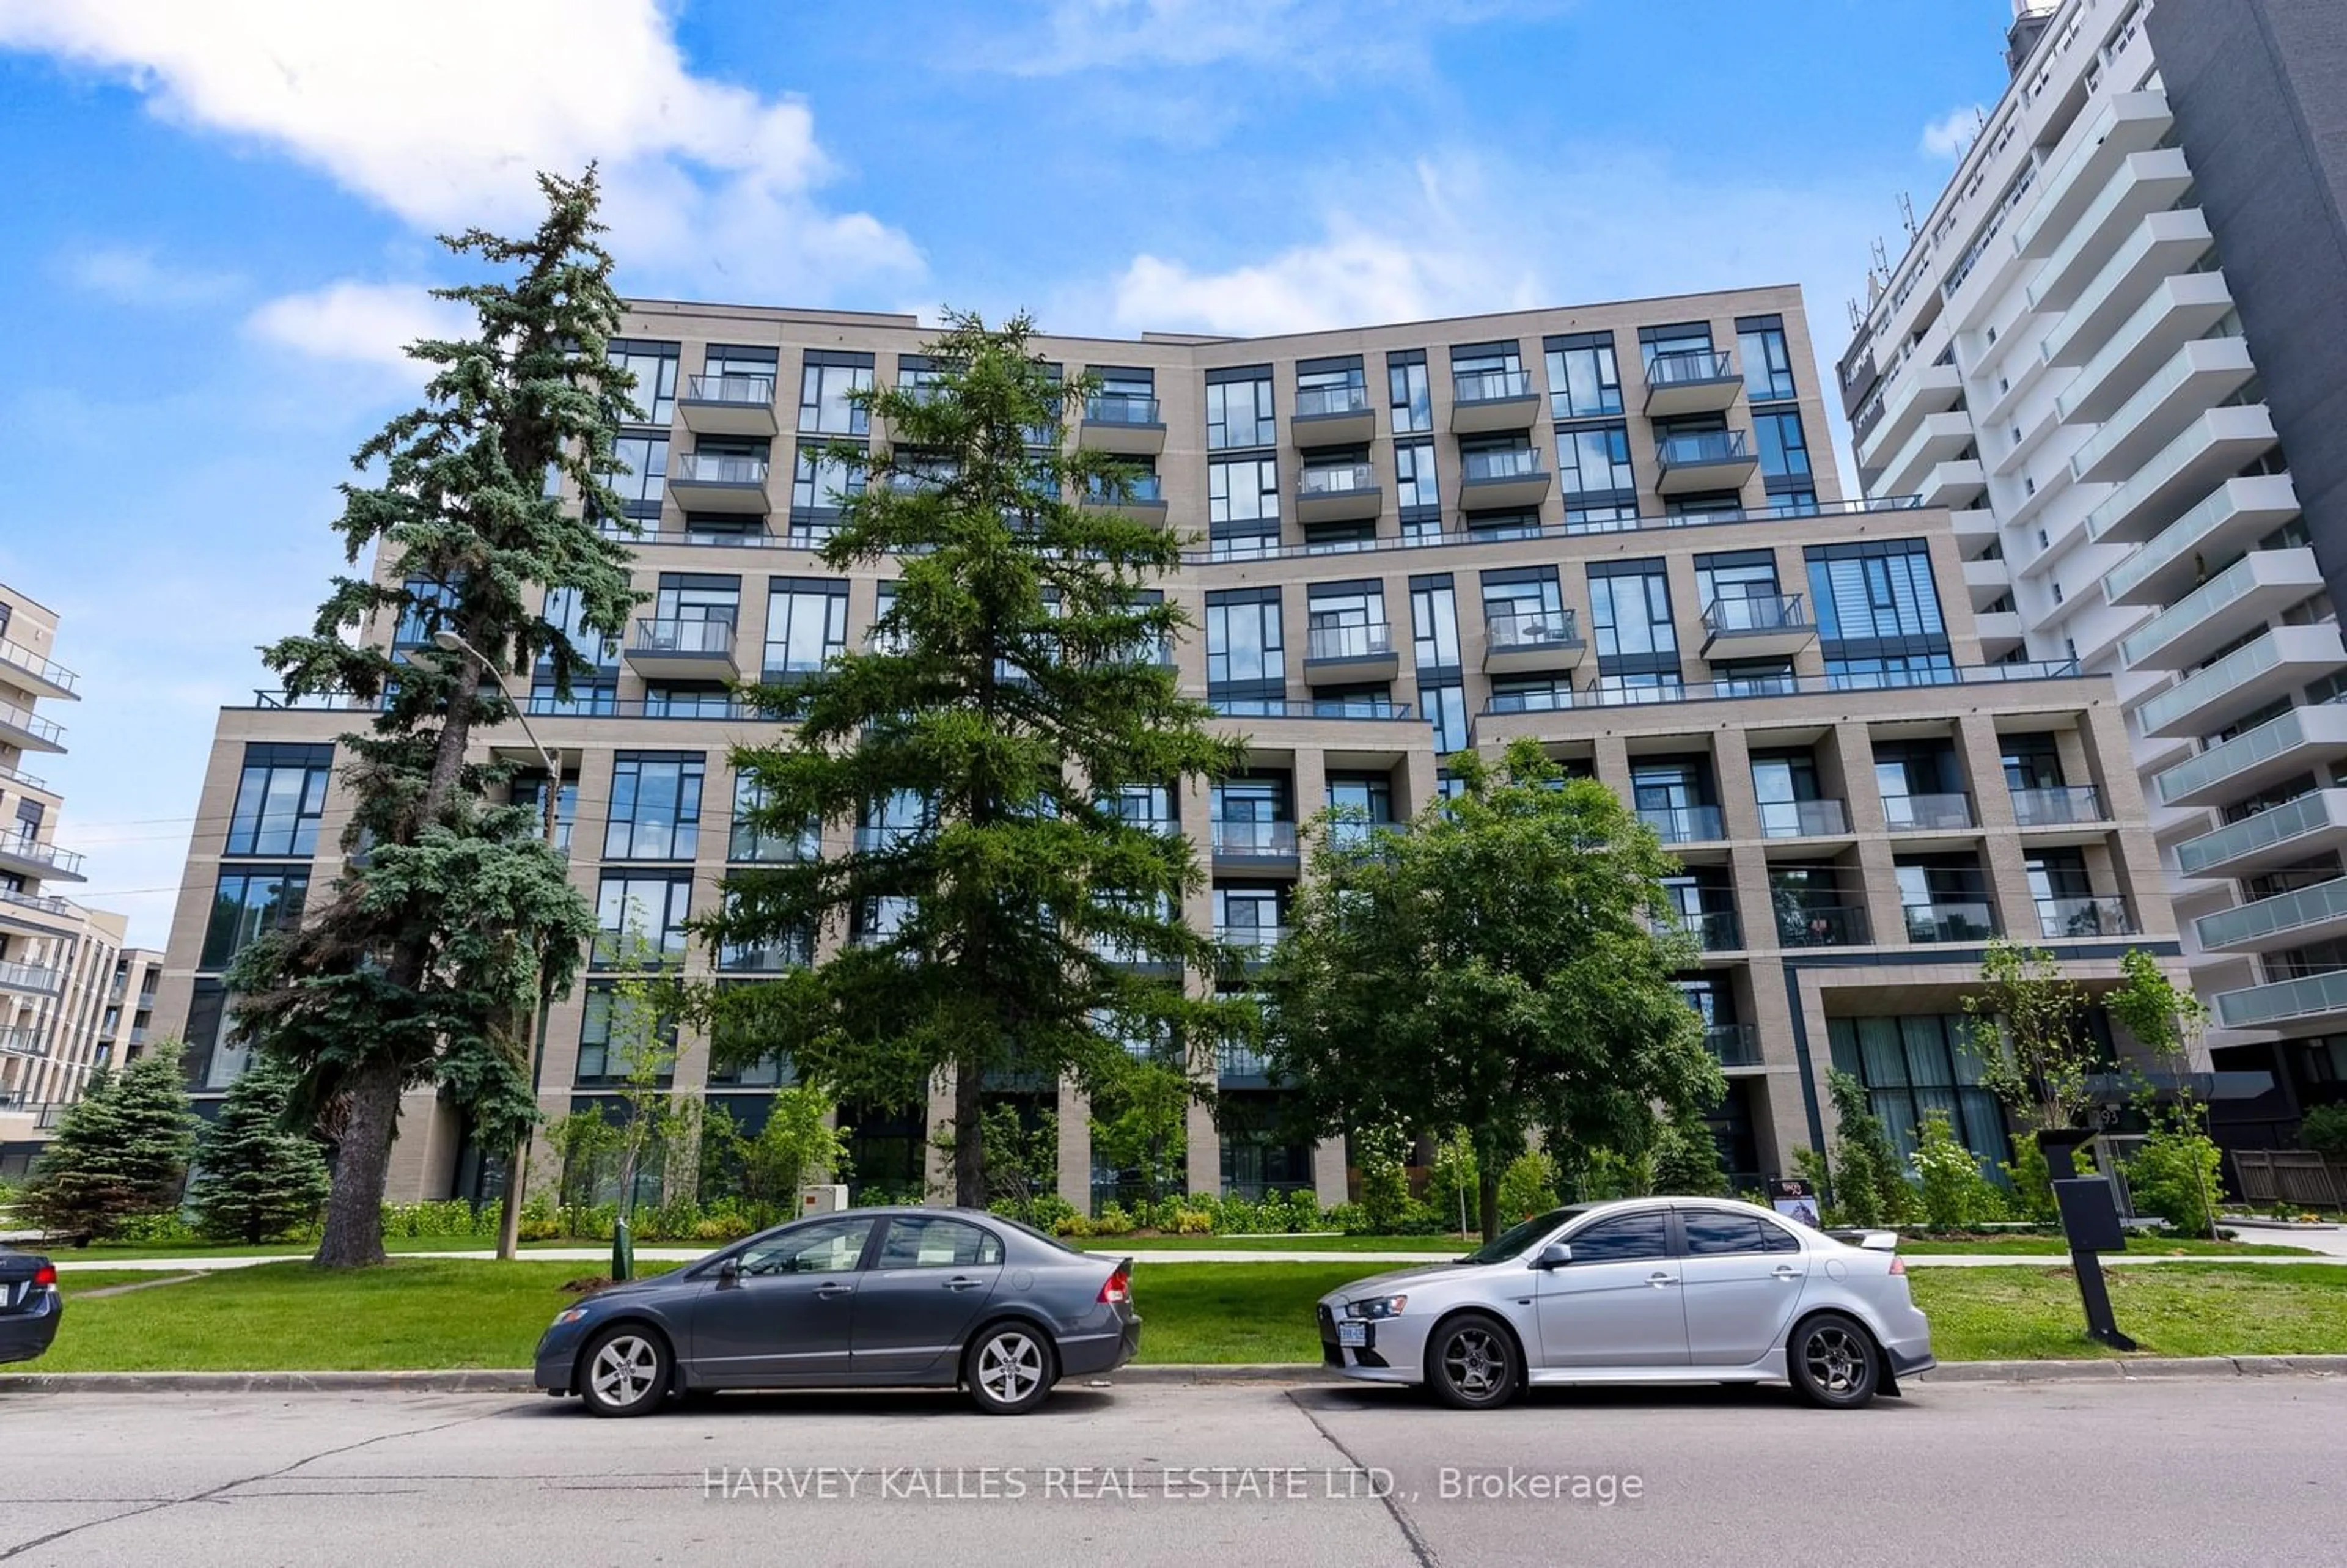 A pic from exterior of the house or condo for 293 The Kingsway #620, Toronto Ontario M9A 3C8